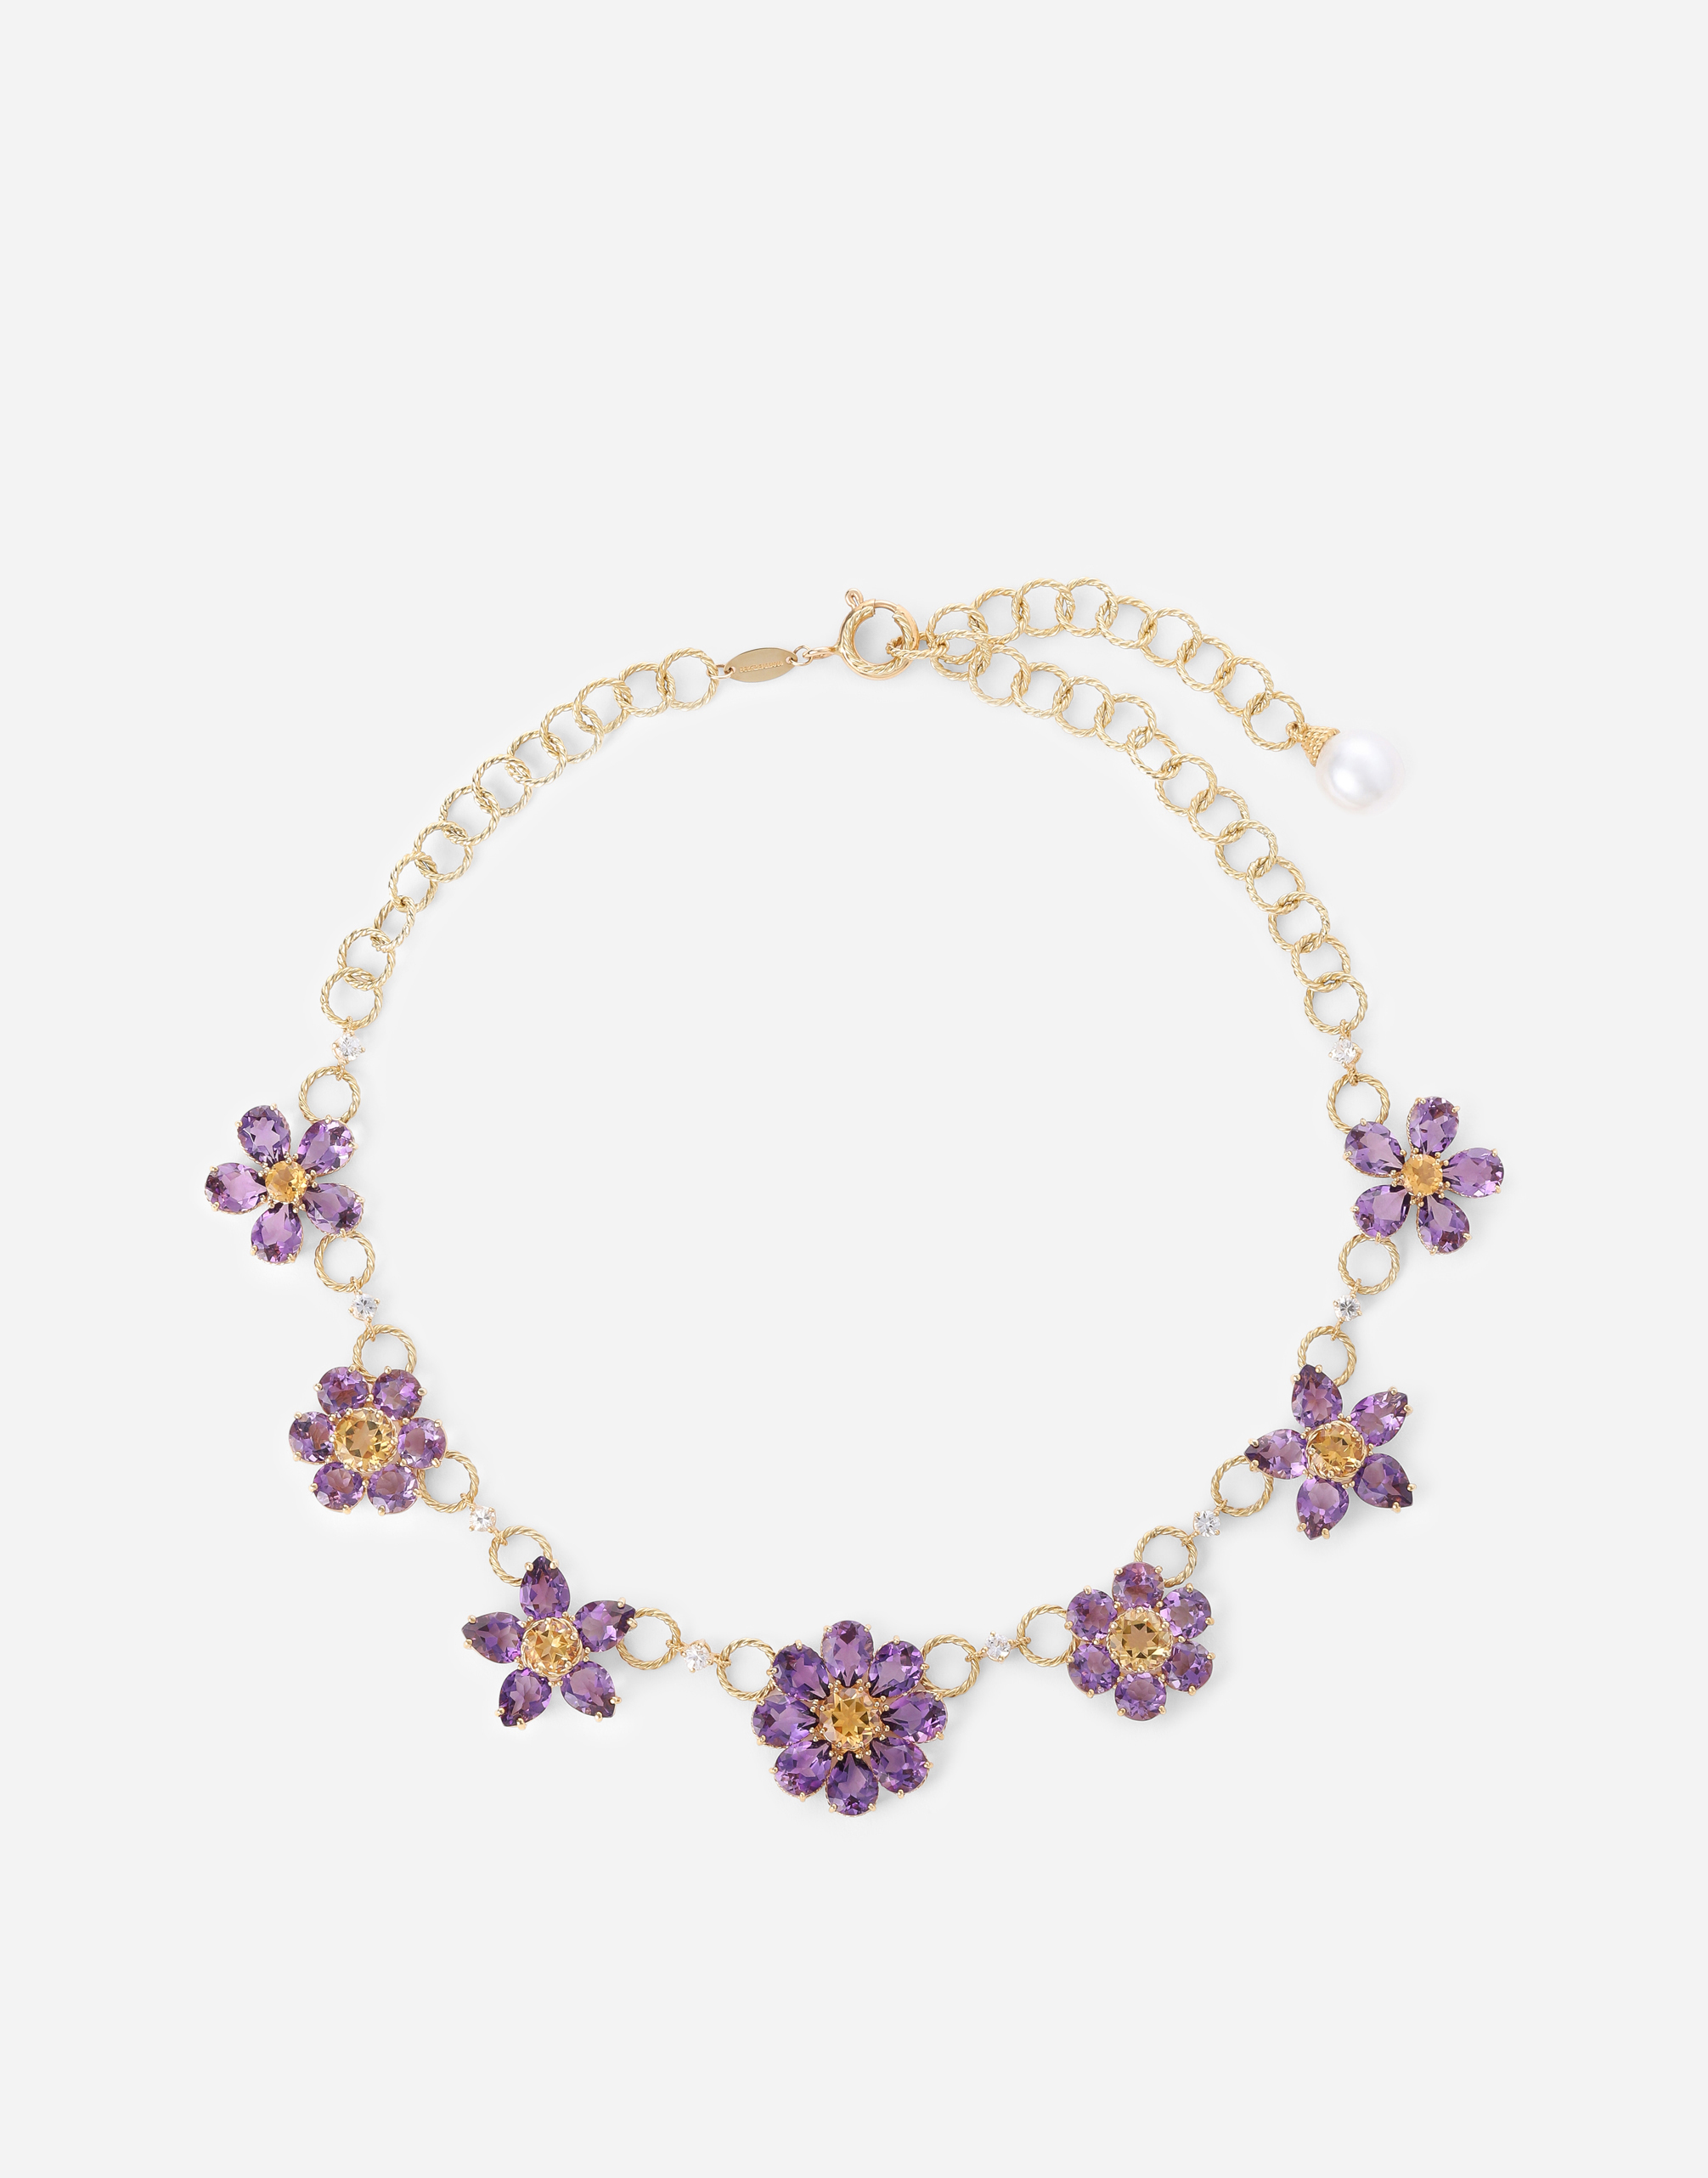 Spring necklace in yellow 18kt gold with amethyst floral motif in Gold